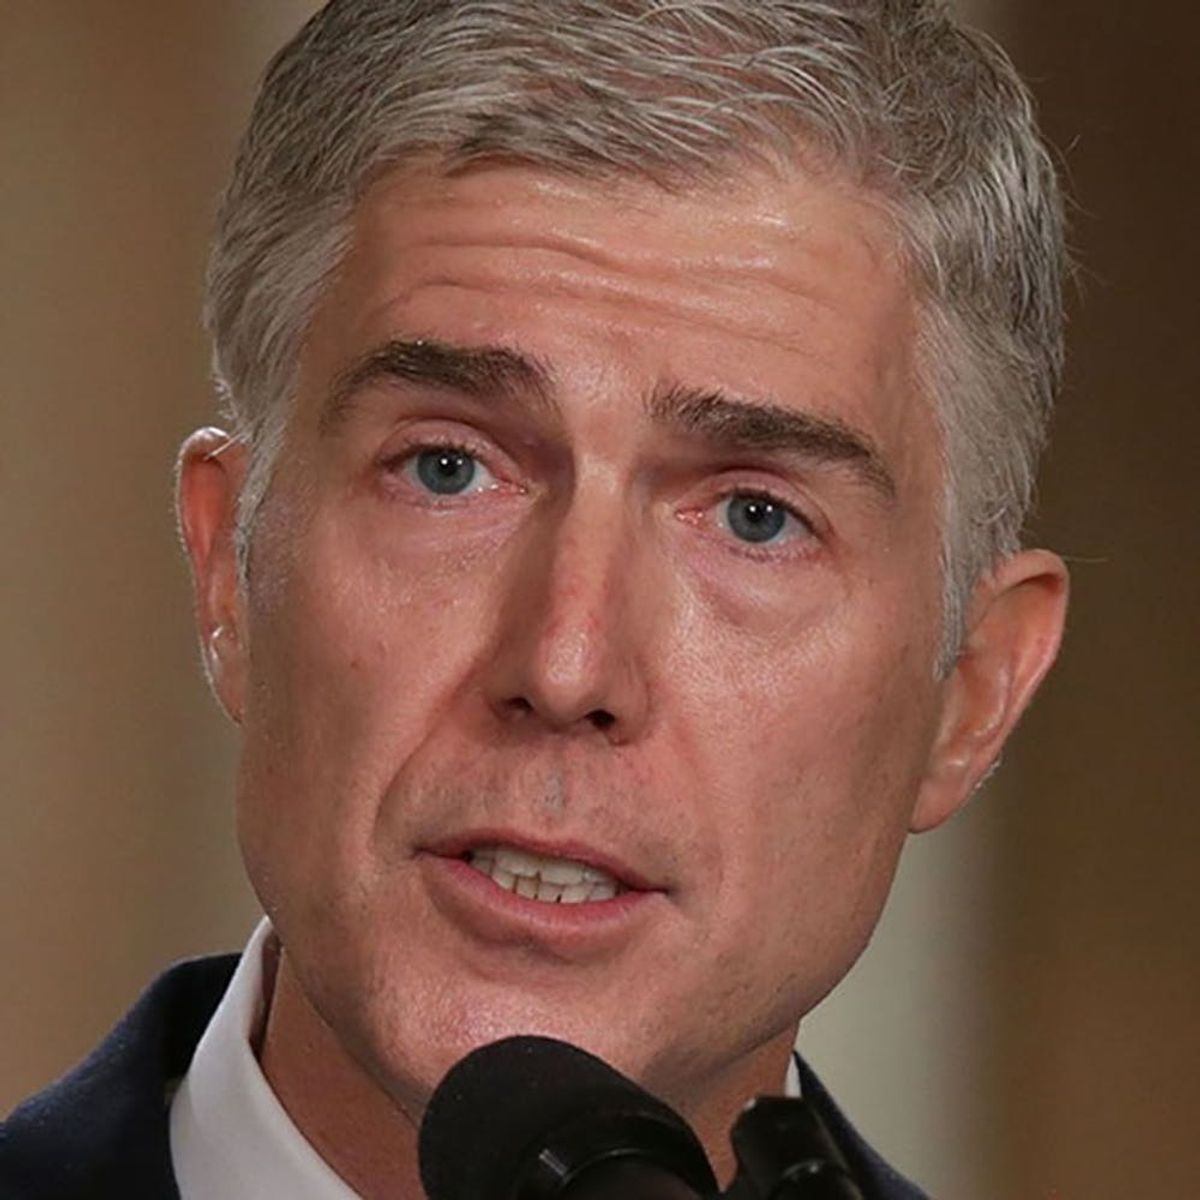 Supreme Court Nominee Neil Gorsuch Just Spoke Out Against President Trump